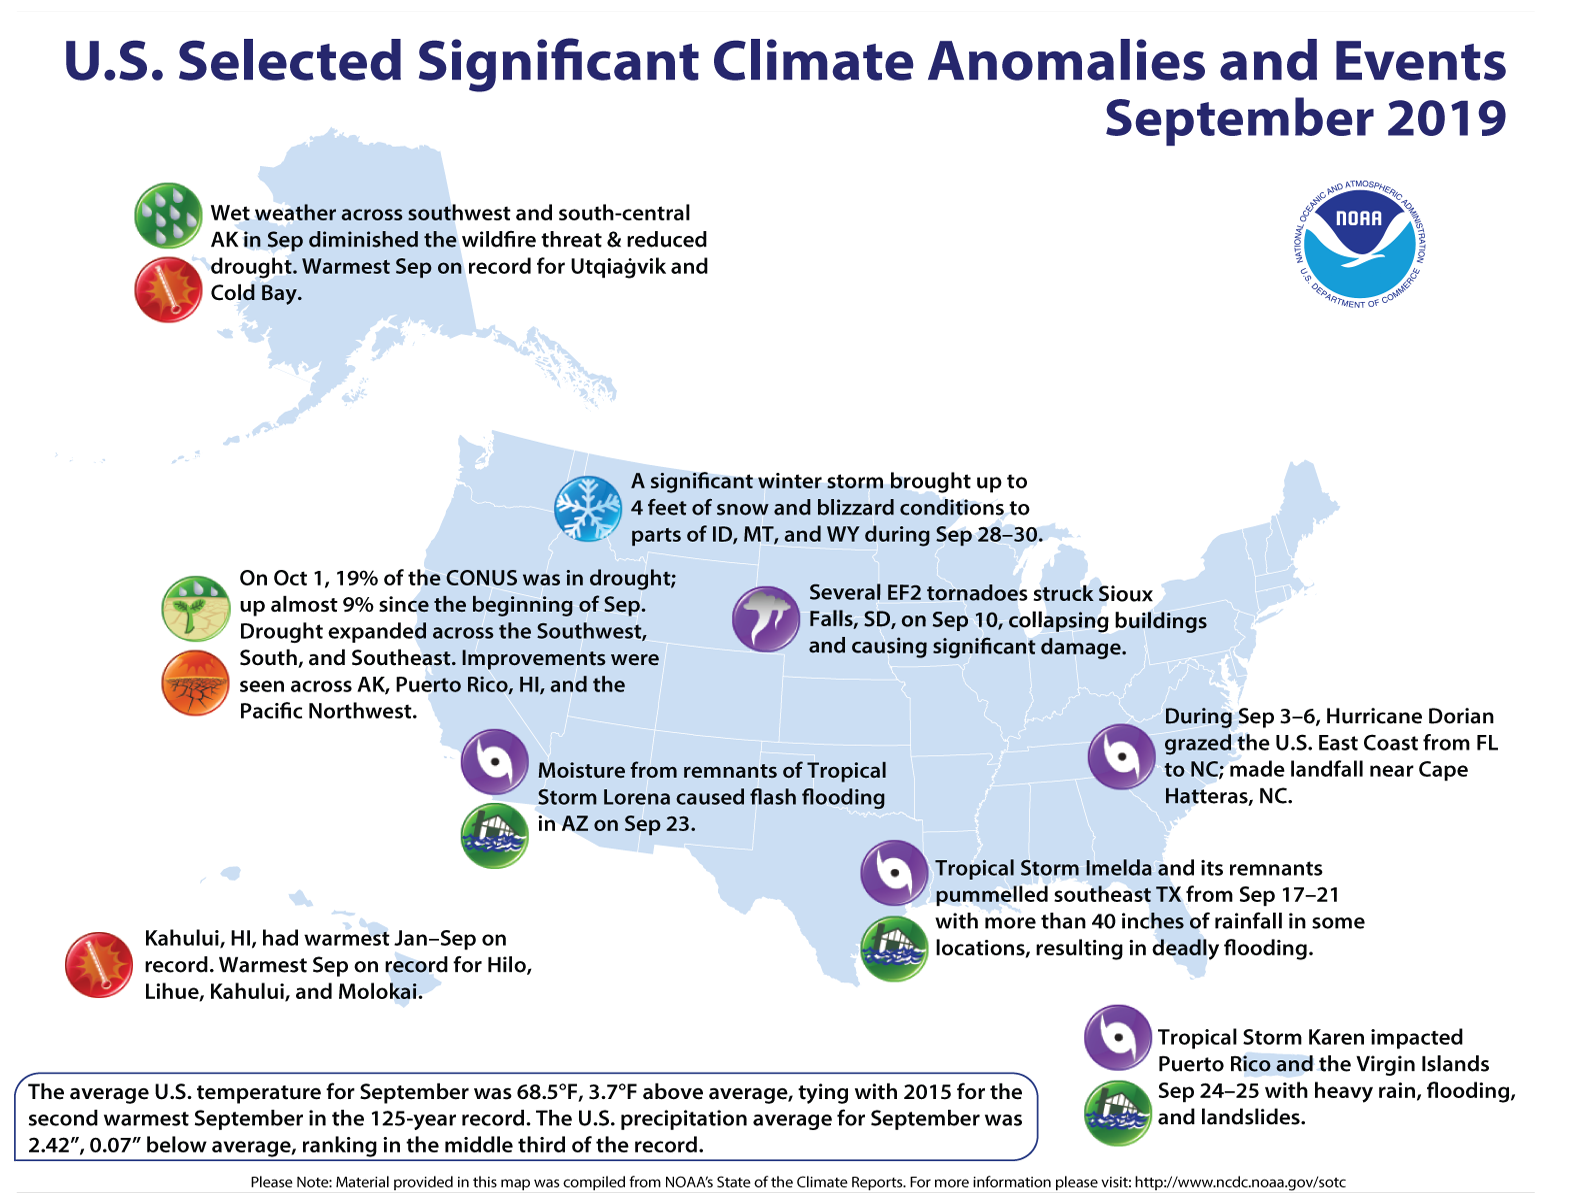 An annotated map of the United States showing notable climate and weather events that occurred across the country during September 2019.